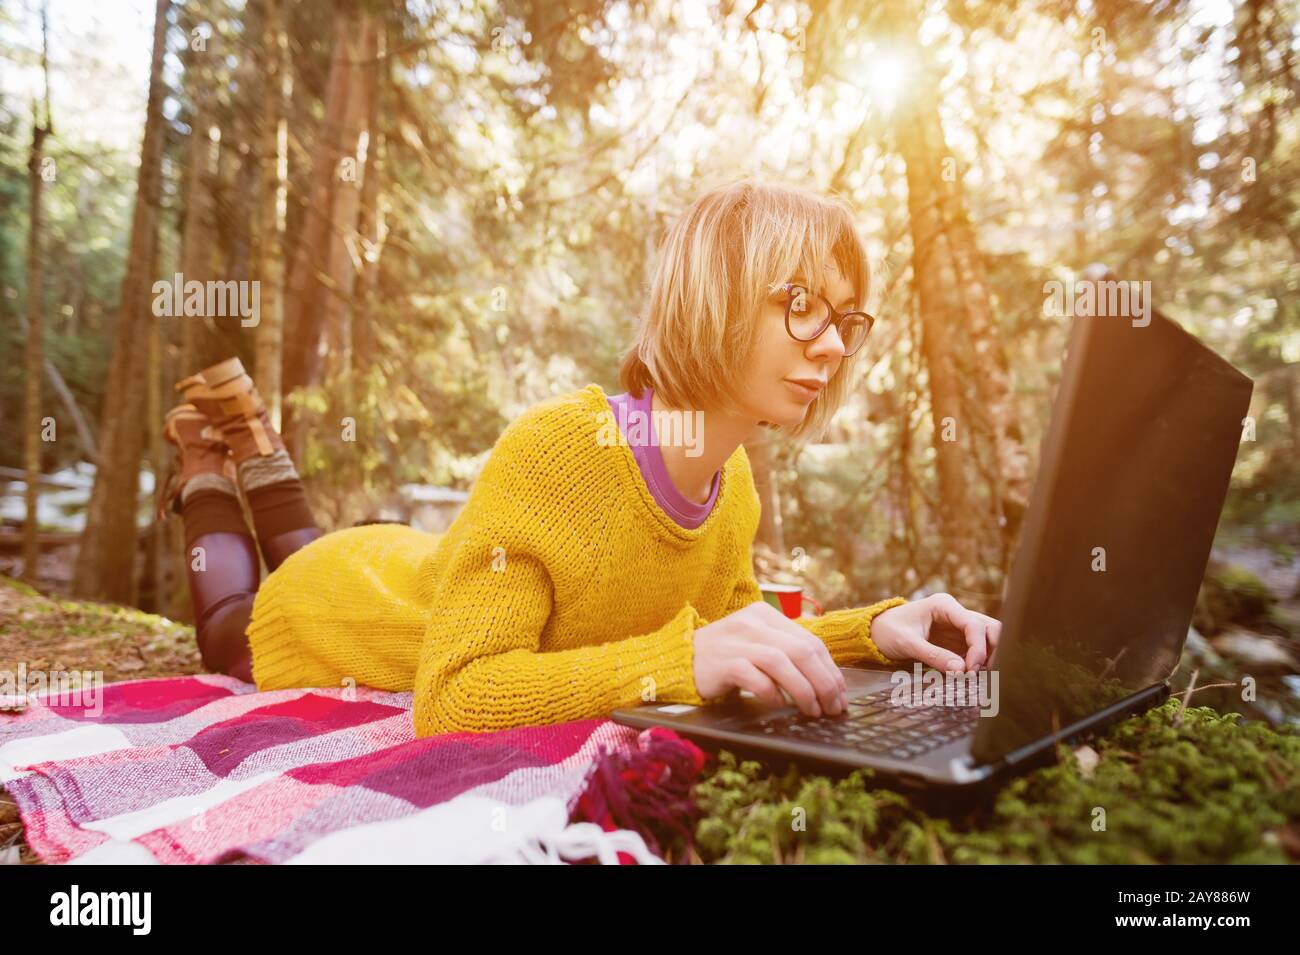 Toned image of a freelancer girl portrait in a yellow sweater and glasses looking thoughtfully at the laptop screen in the natur Stock Photo